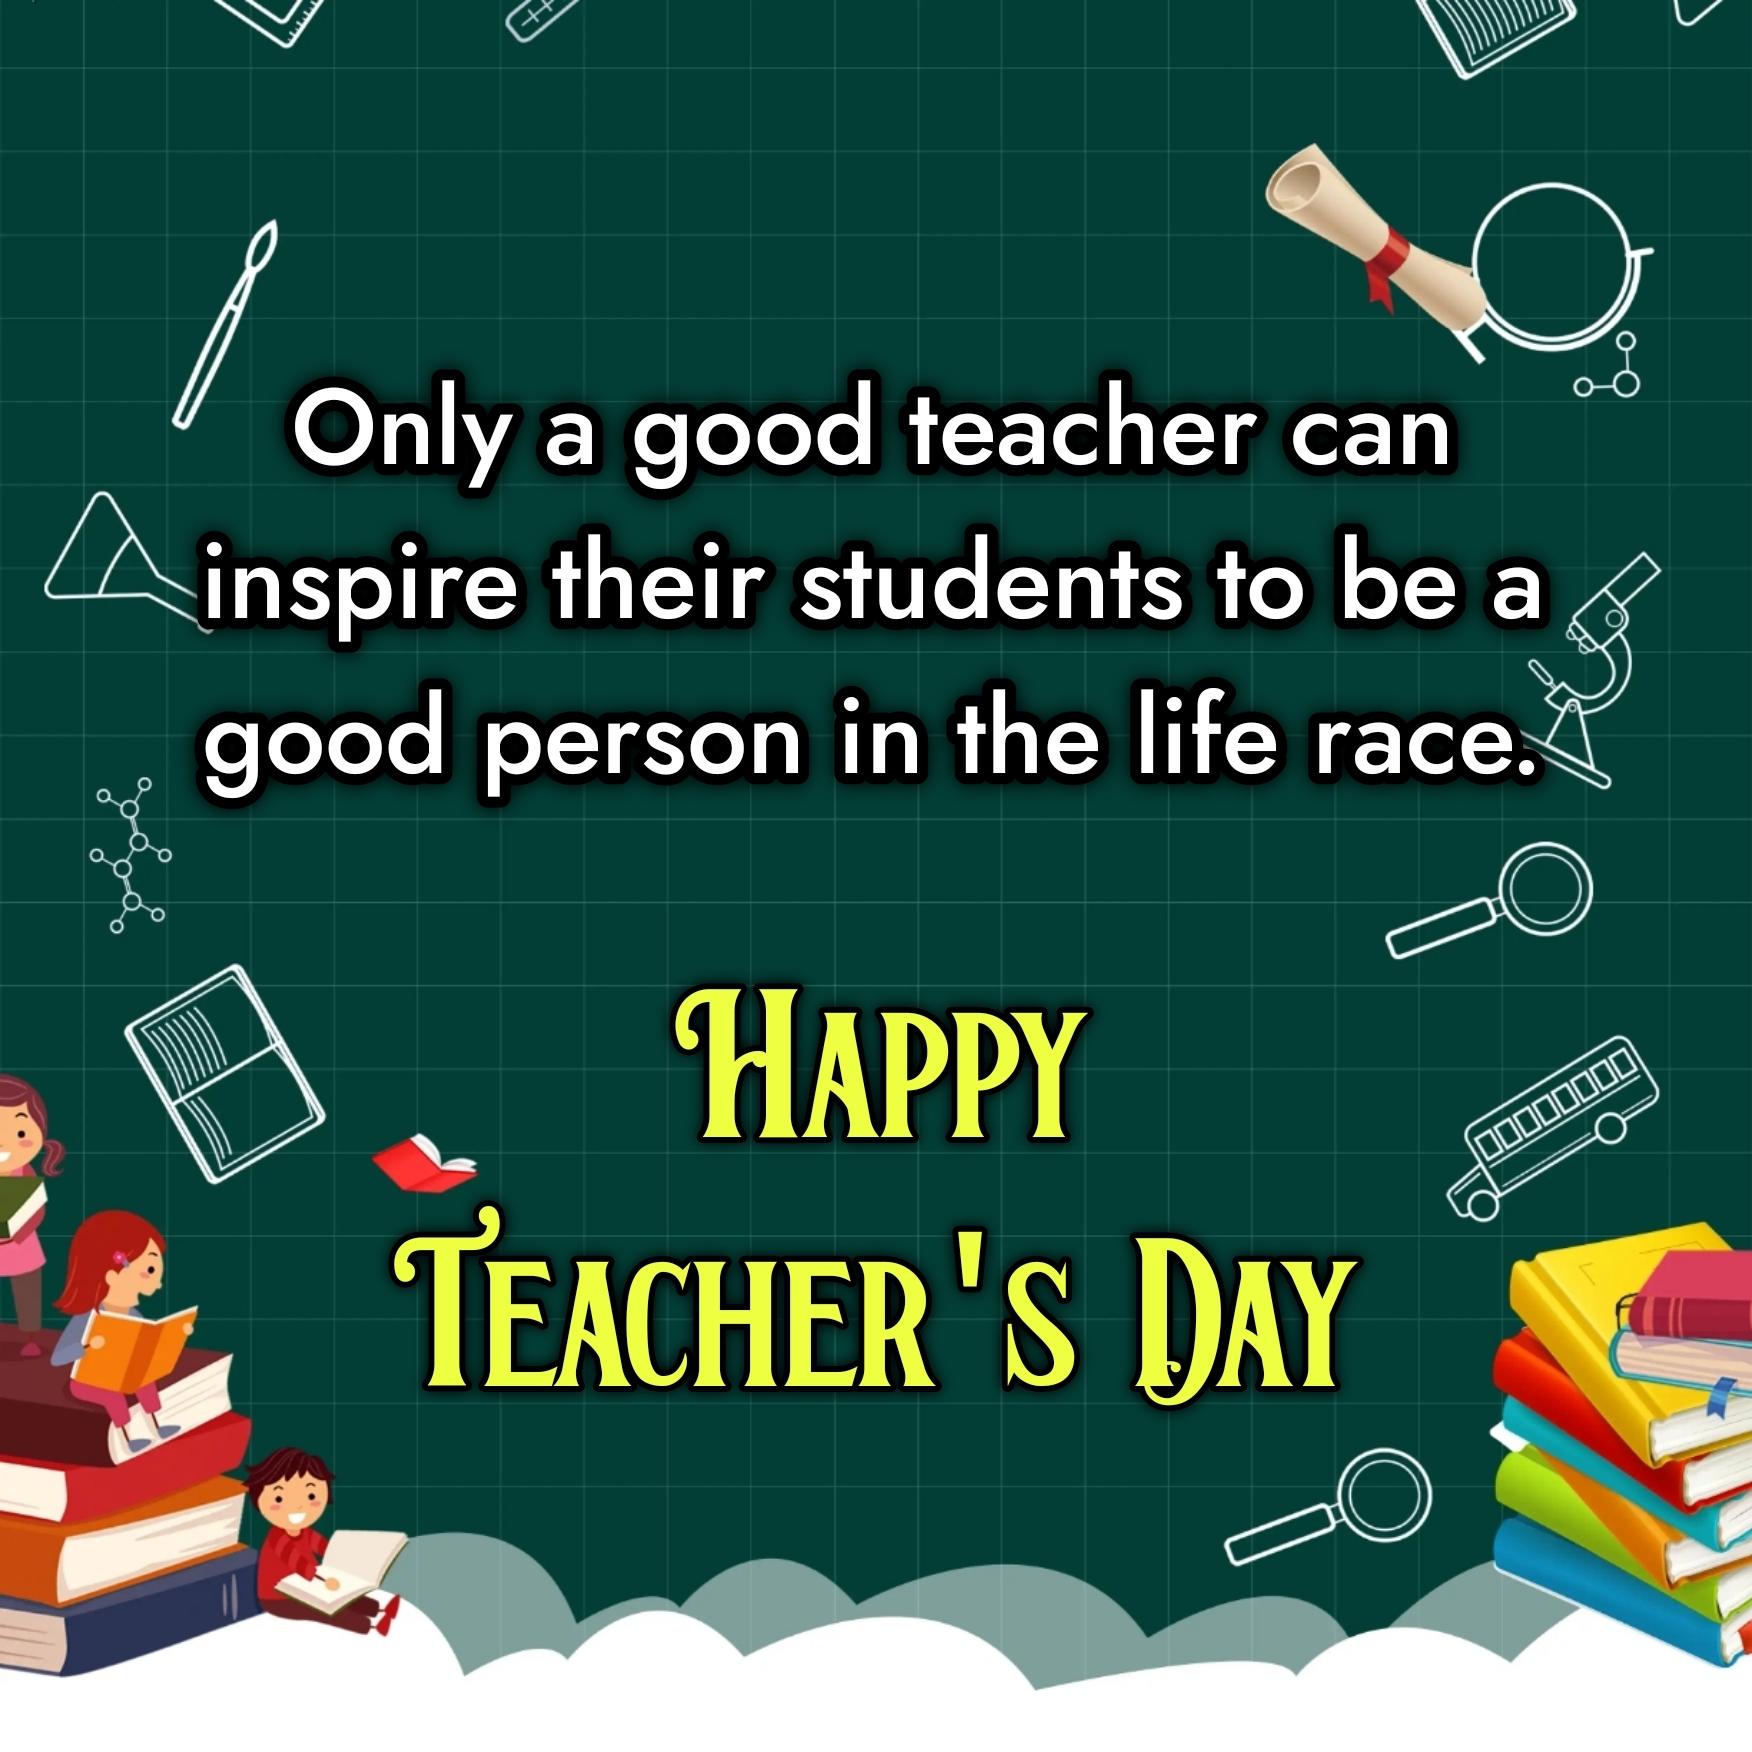 Only a good teacher can inspire their students